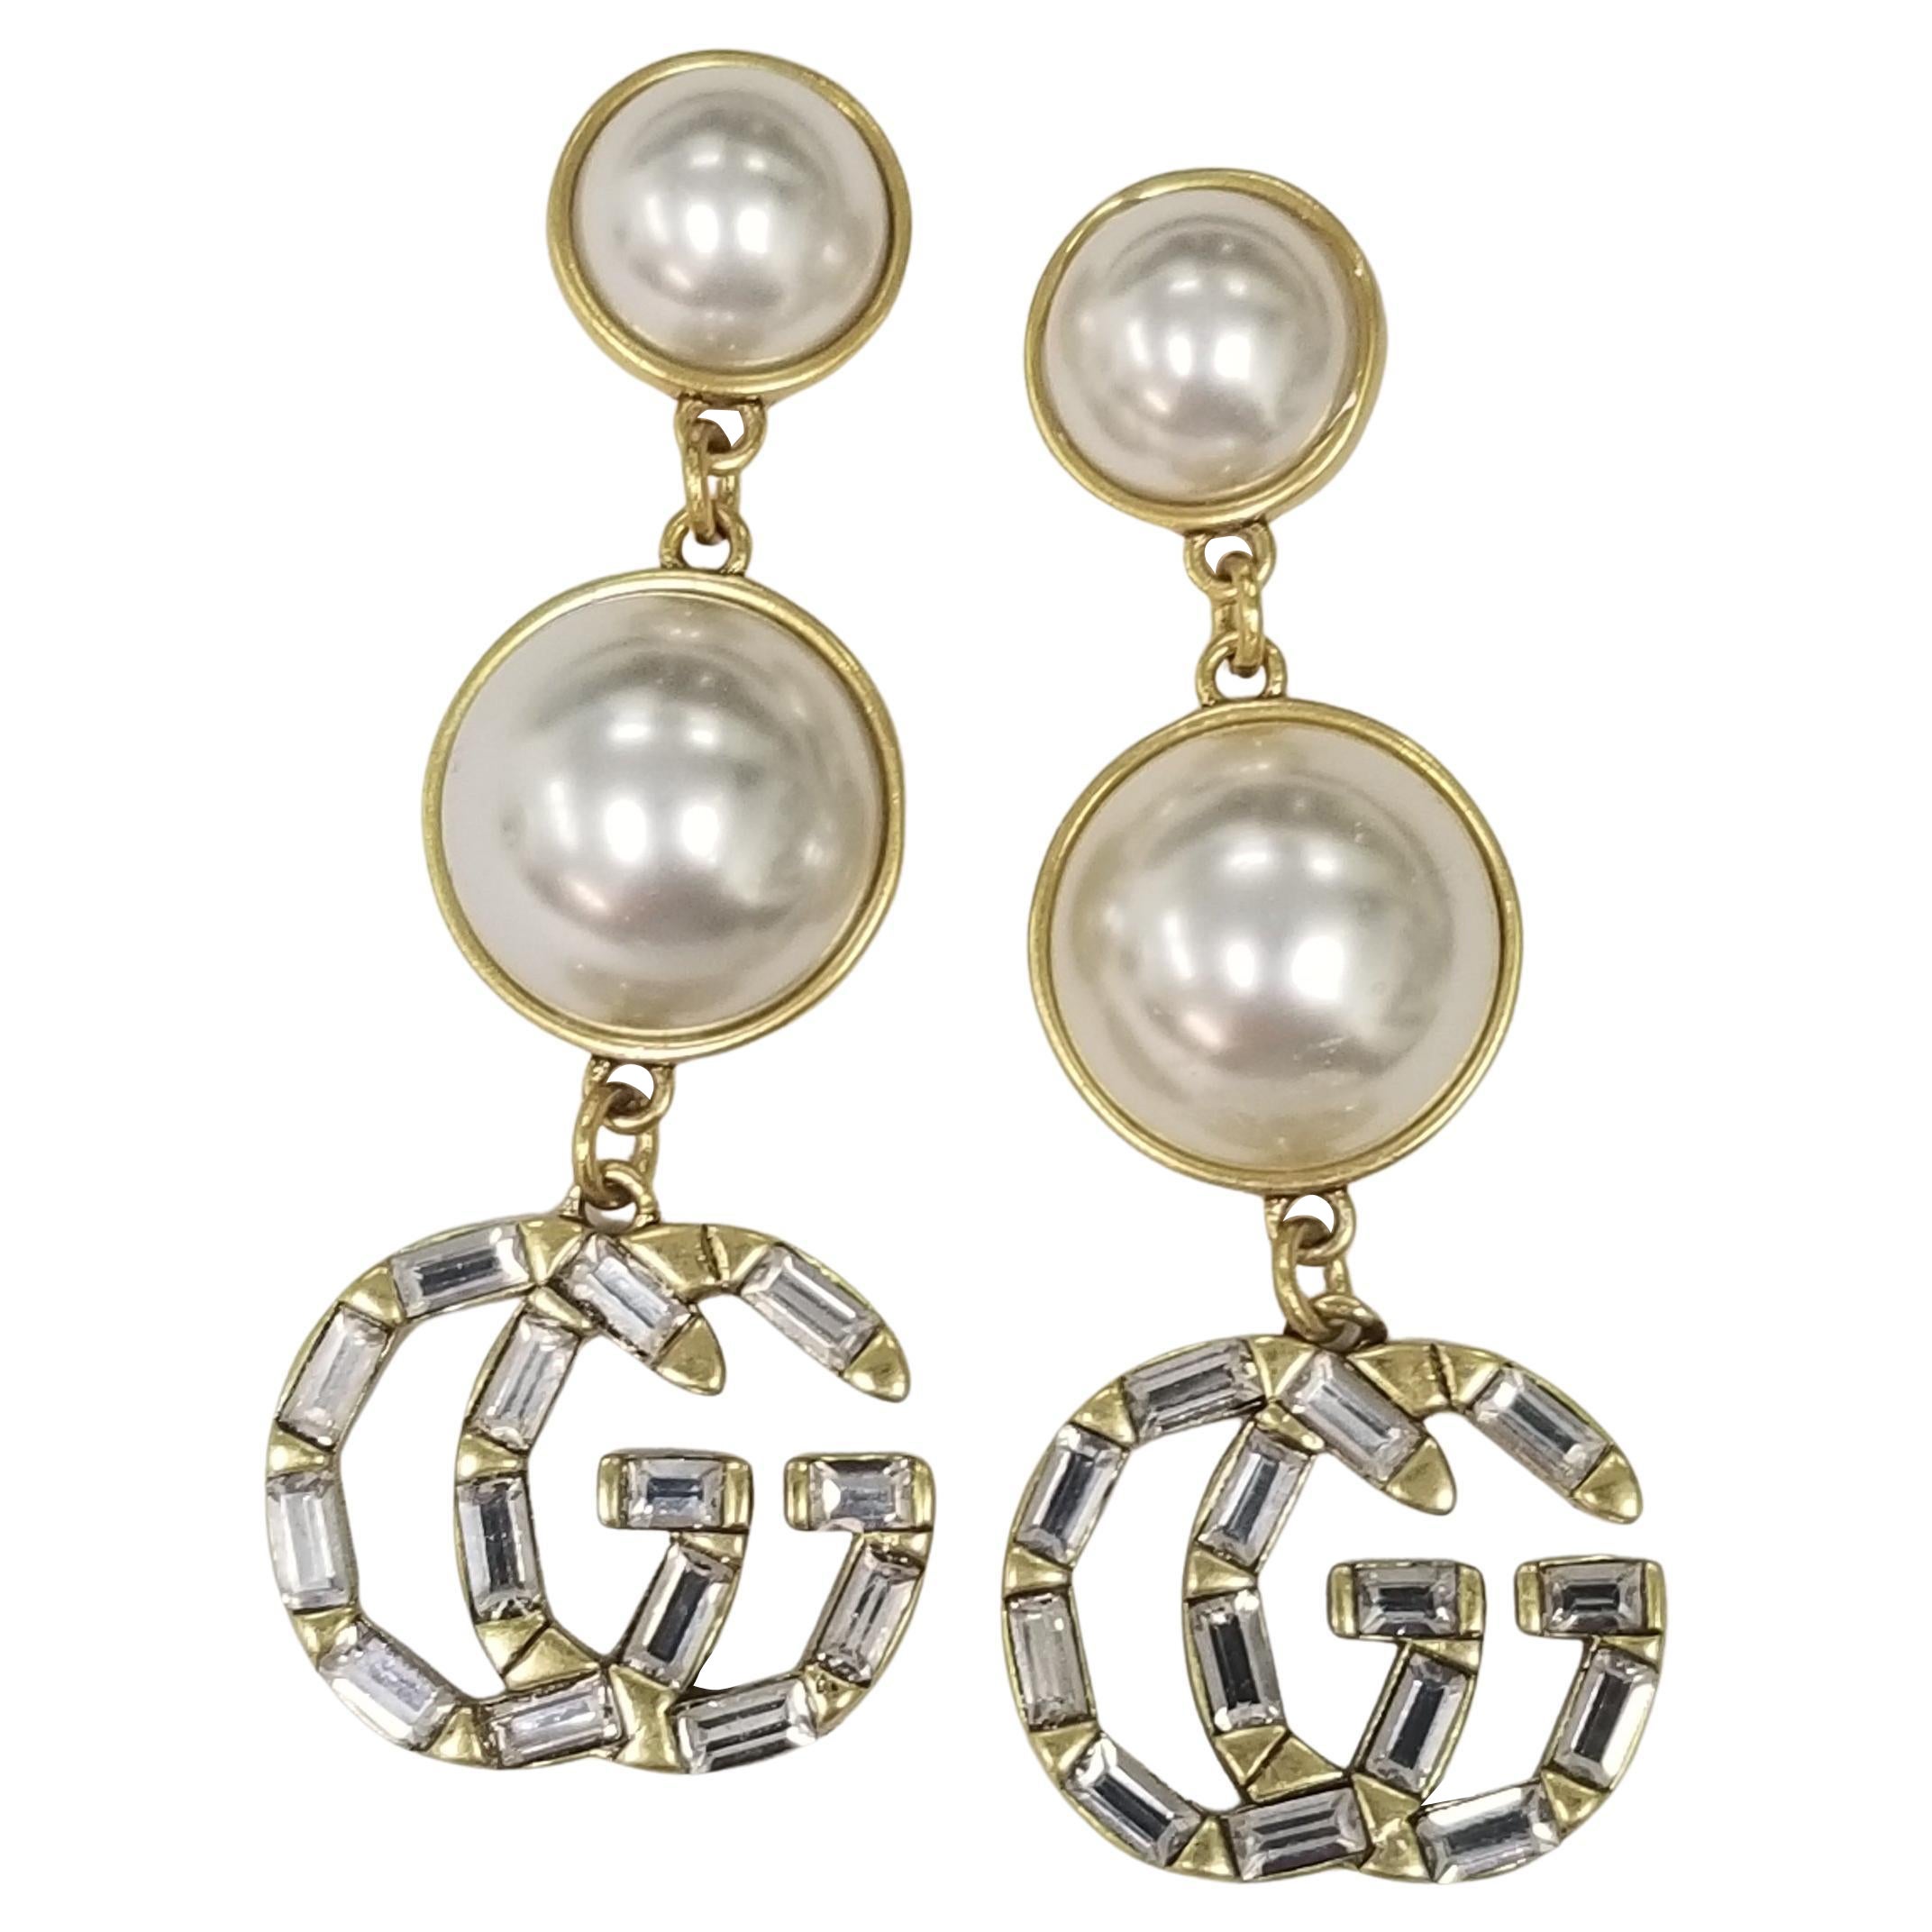 Gucci Pearl Double G Earrings - Gold